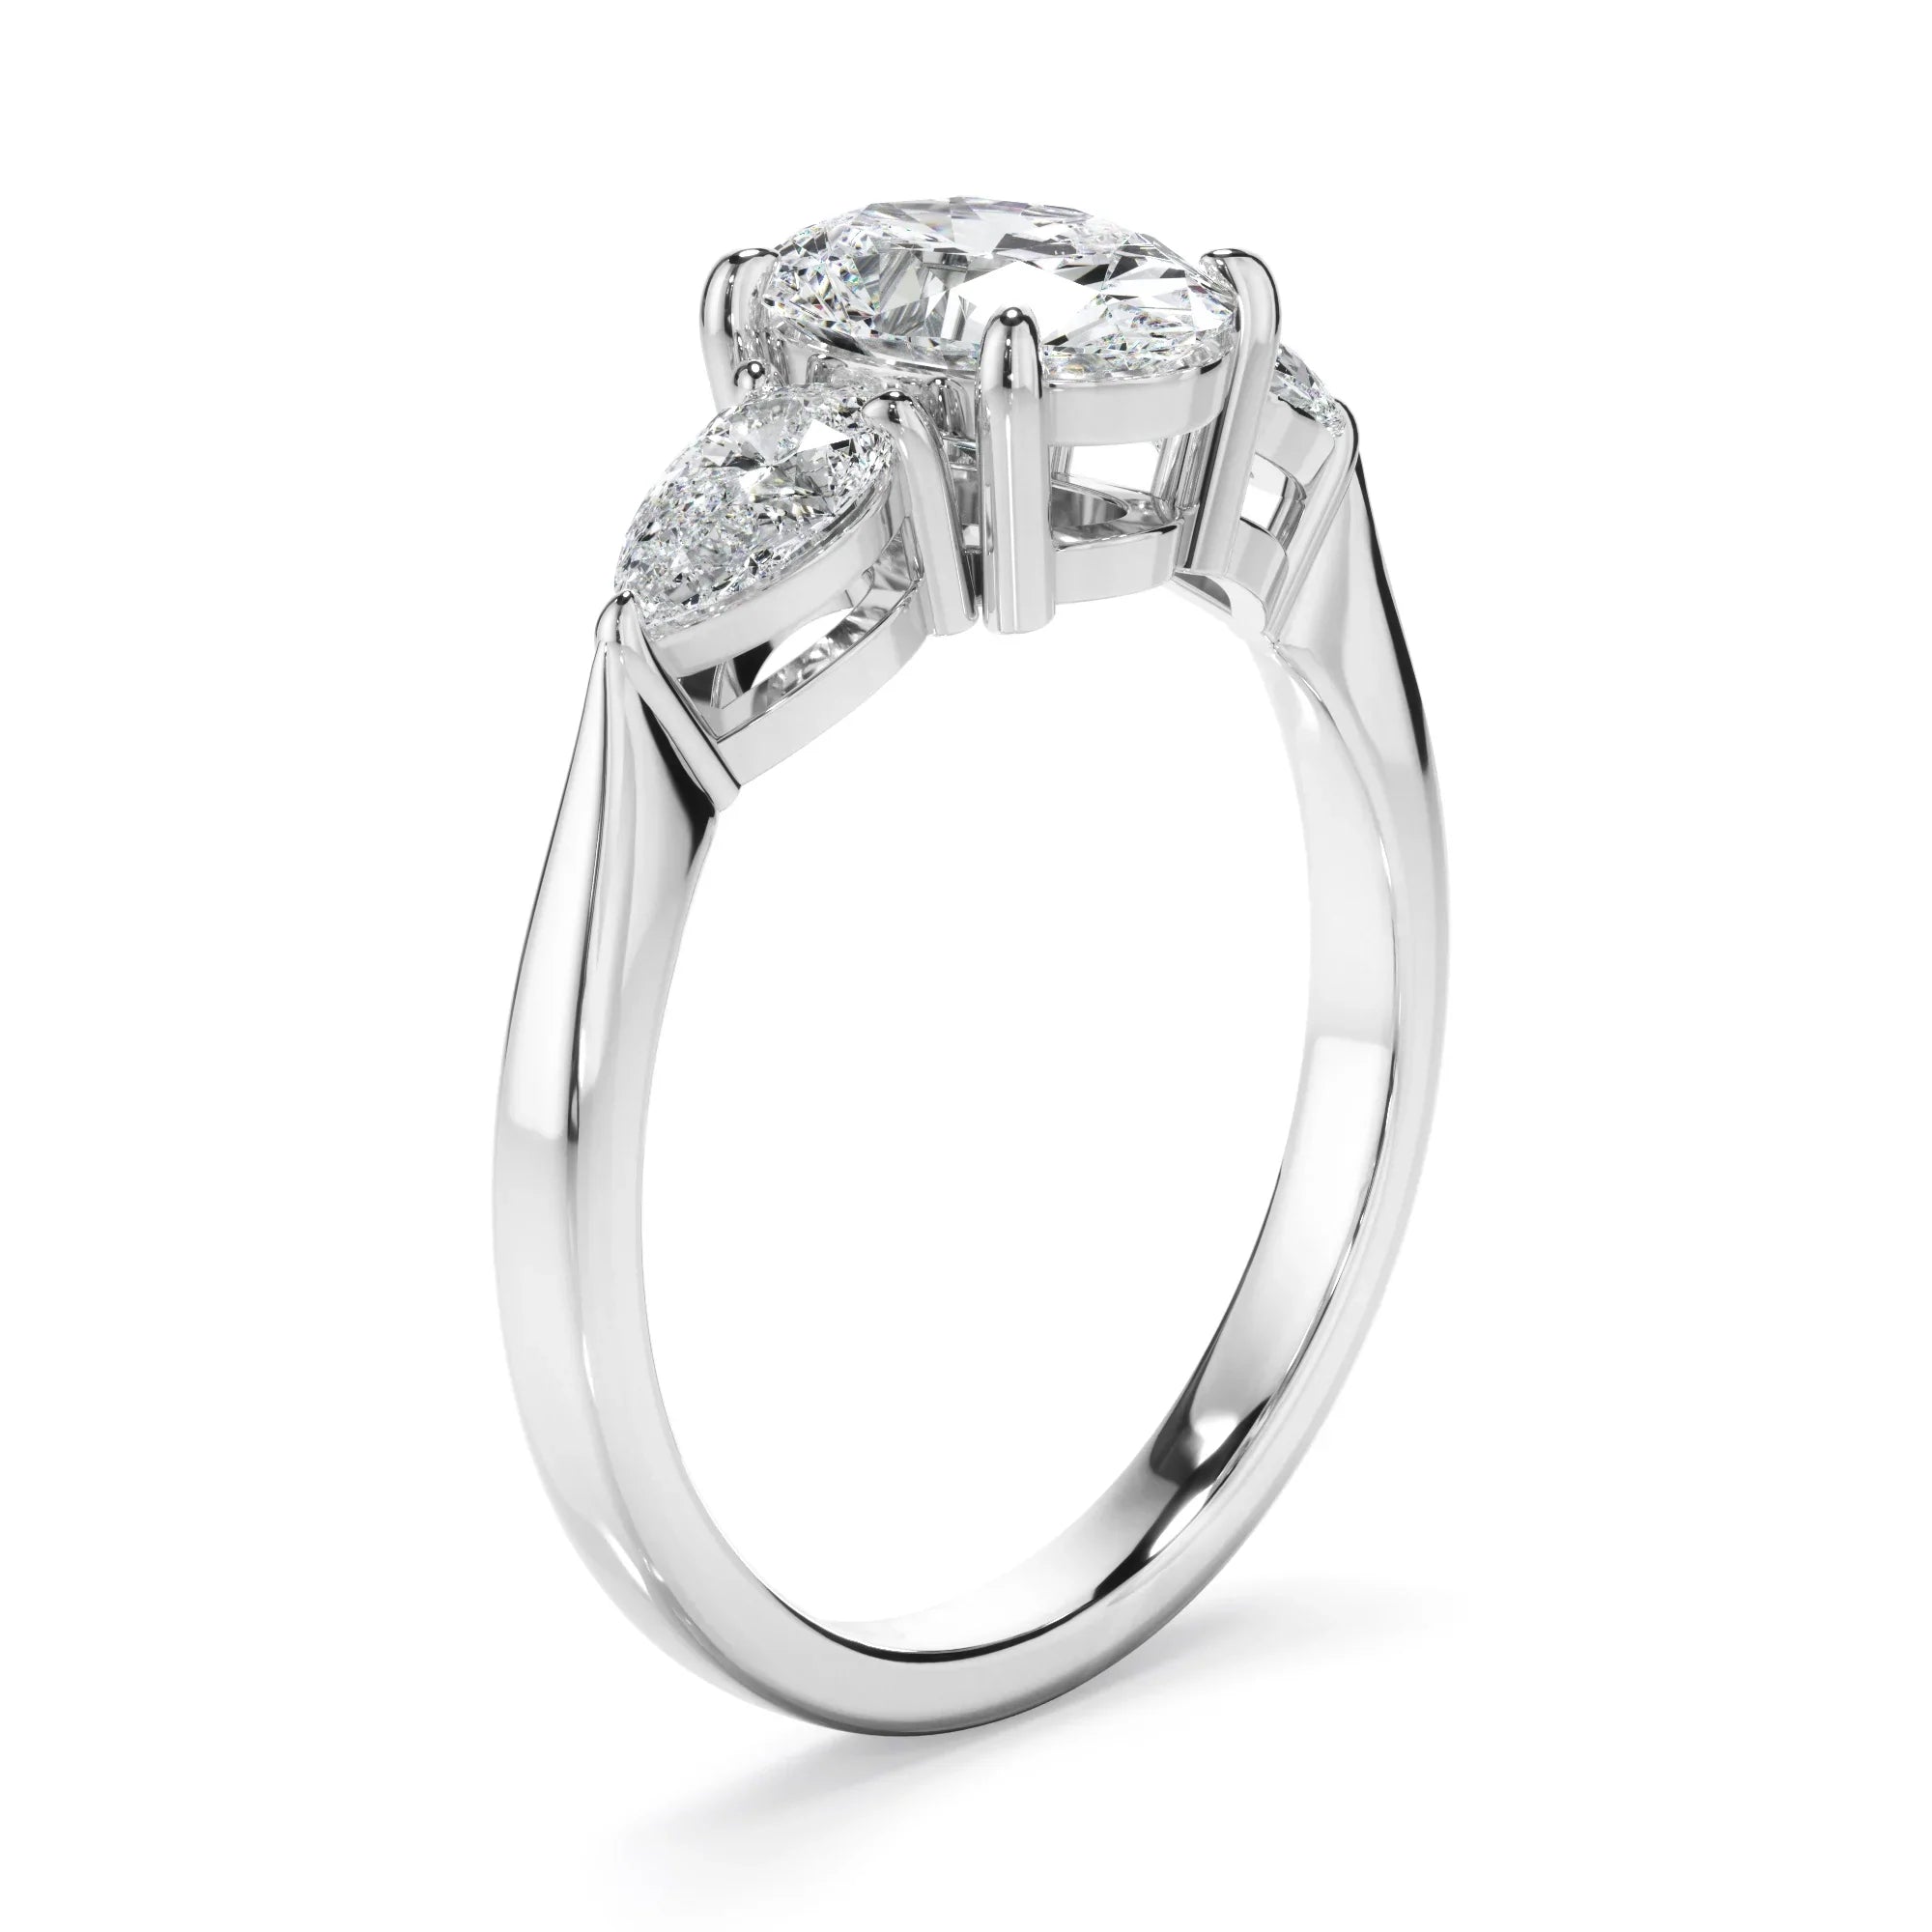 Oval Cut Diamond Engagement Ring With Pear Cut Diamond Sides